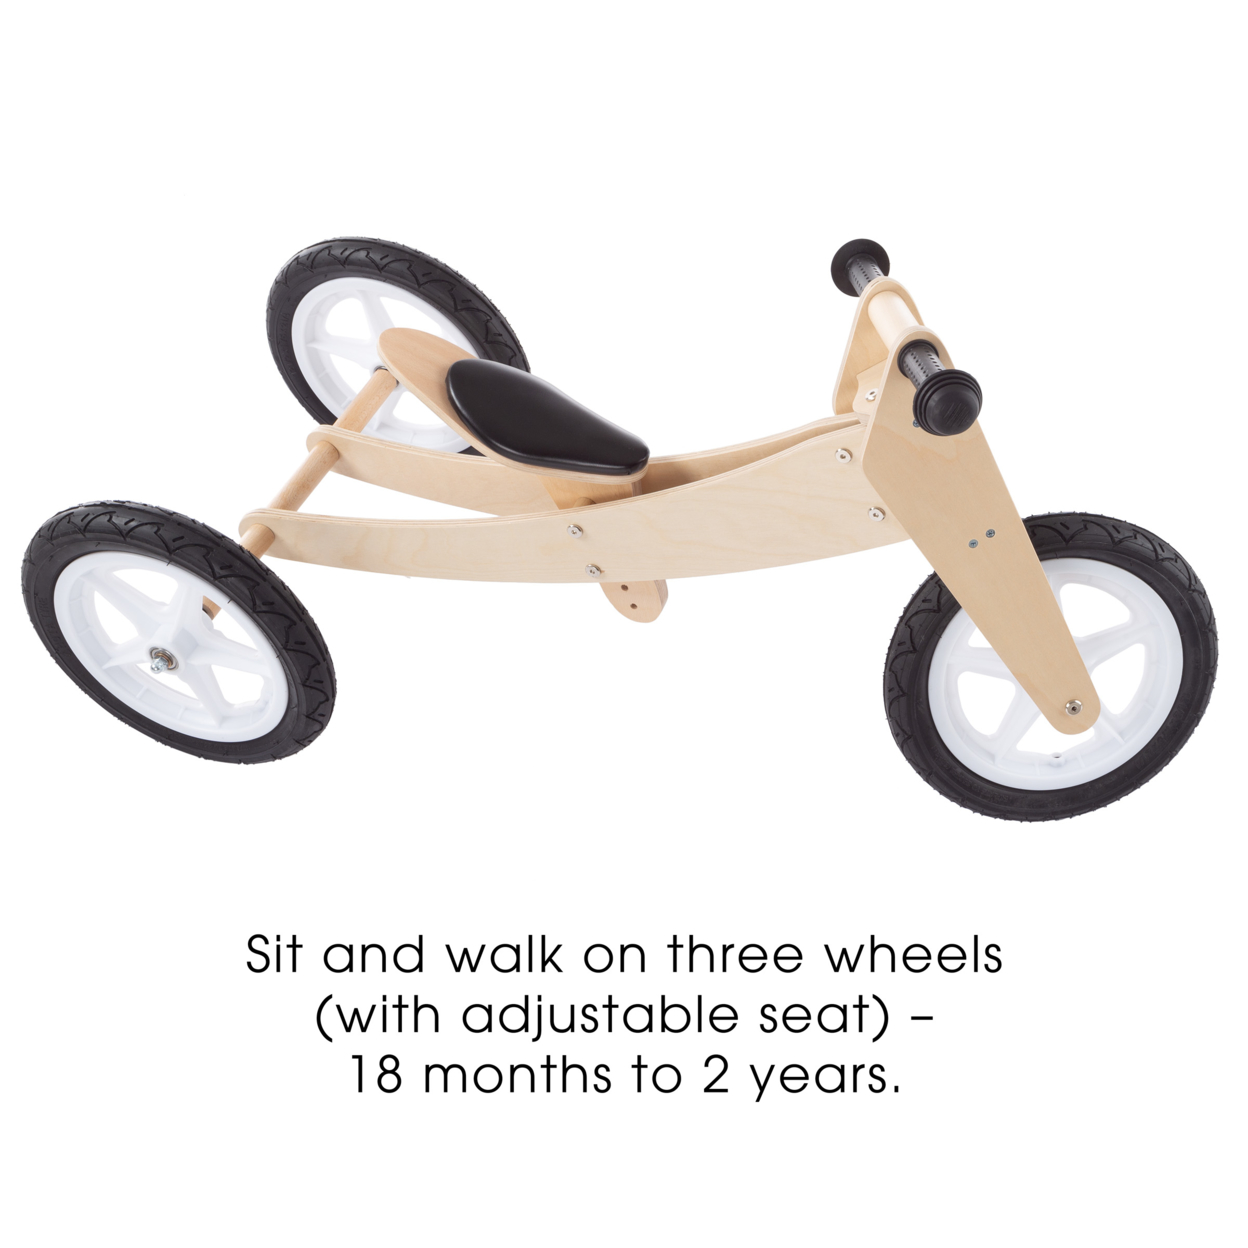 3-in-1 Balance Bike Multistage Wooden Walking Beginner Tricycle Convertible Ride On Boys And Girls